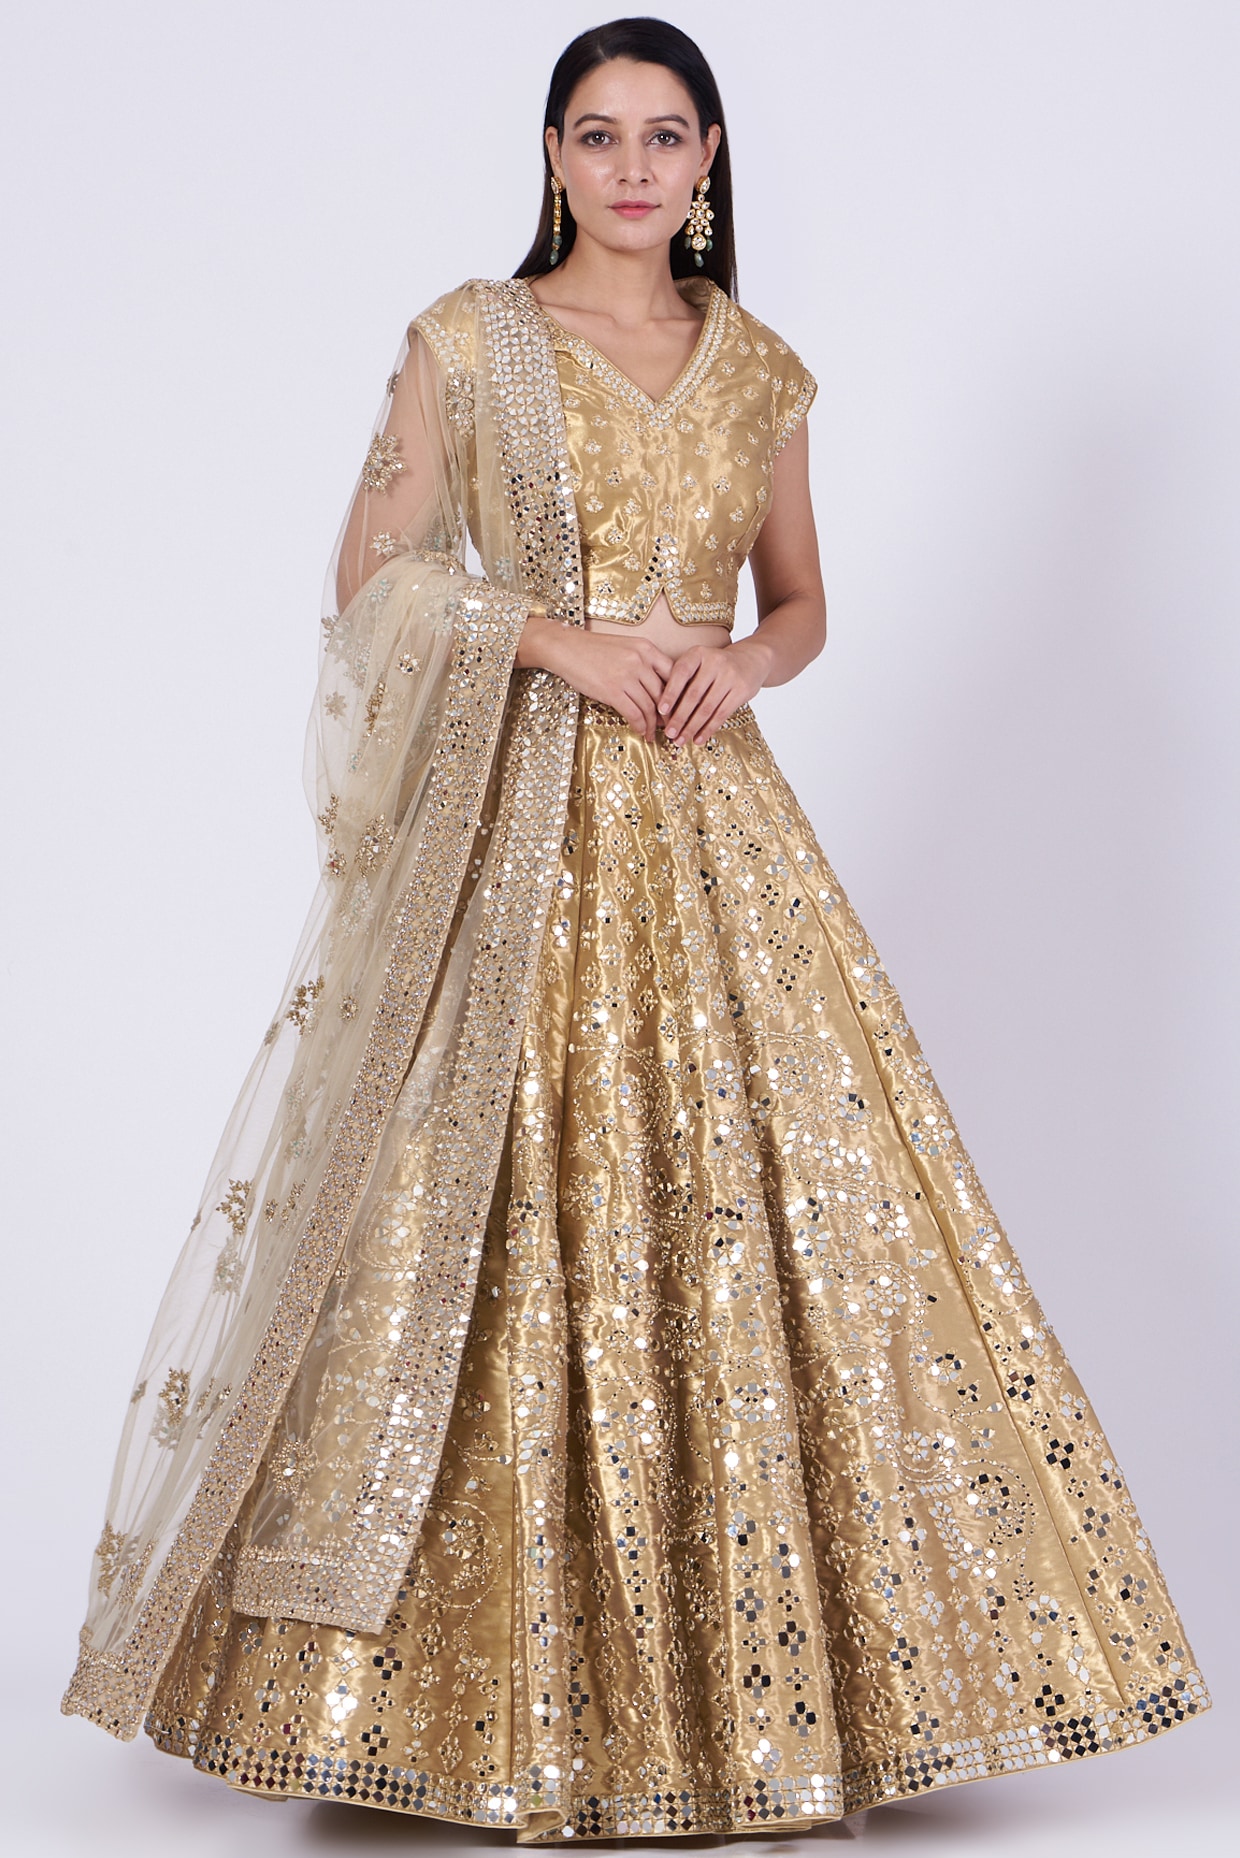 HELLO! India - #HELLOExclusive: Abhinav Mishra's traditional ensembles  always bring together the best of Indian crafts and modern trends. Whether  it's a gold-embellished peplum skirt set in tissue organza or an ivory